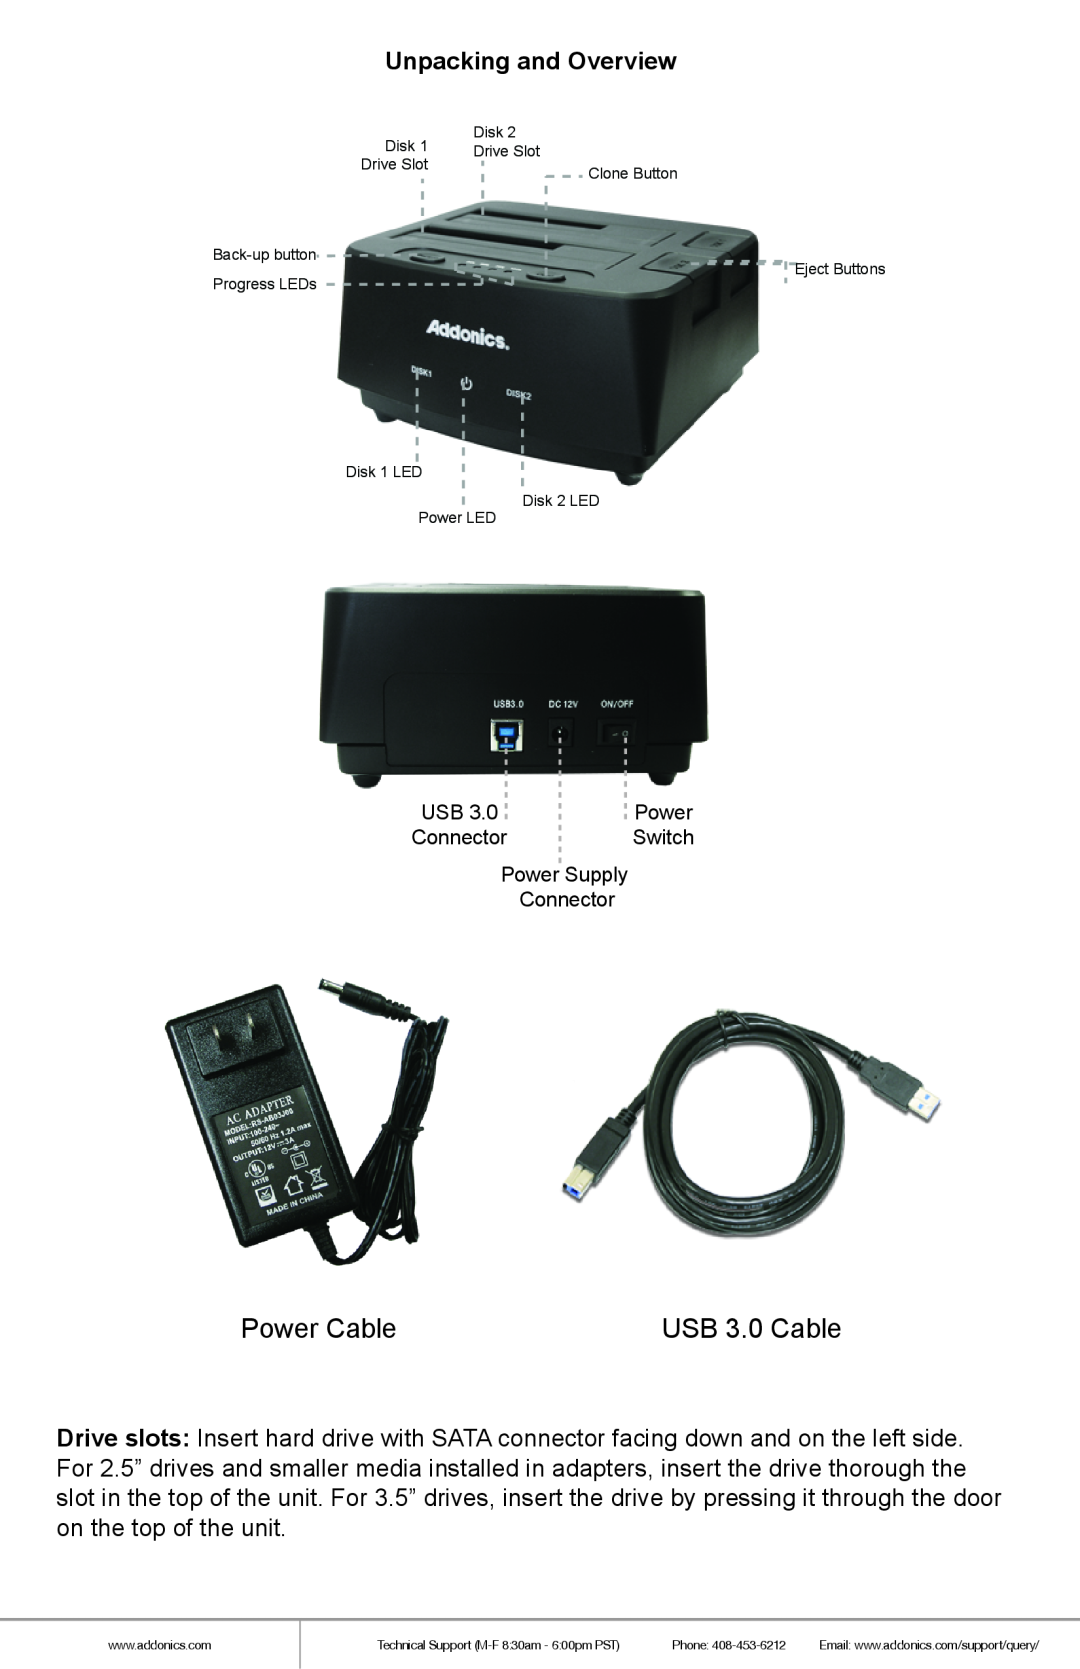 Addonics Technologies HDMU3 manual Power Cable, USB 3.0 Cable, Unpacking and Overview 